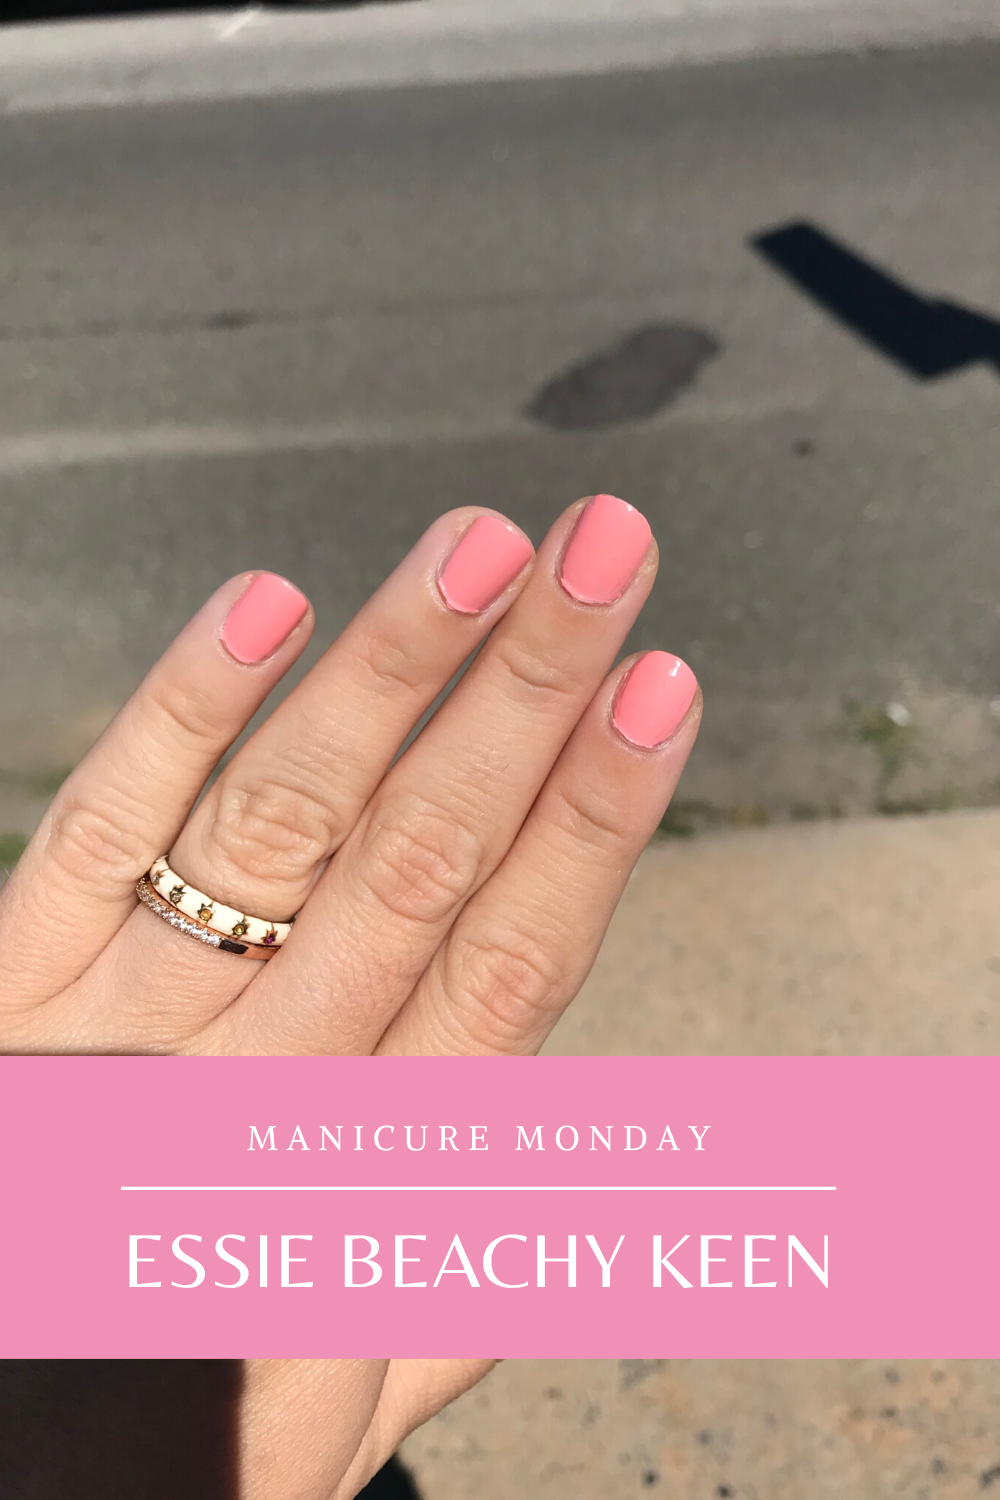 Monday: Collection | + Pink Keen Beachy Business Sunny Essie Royally Manicure